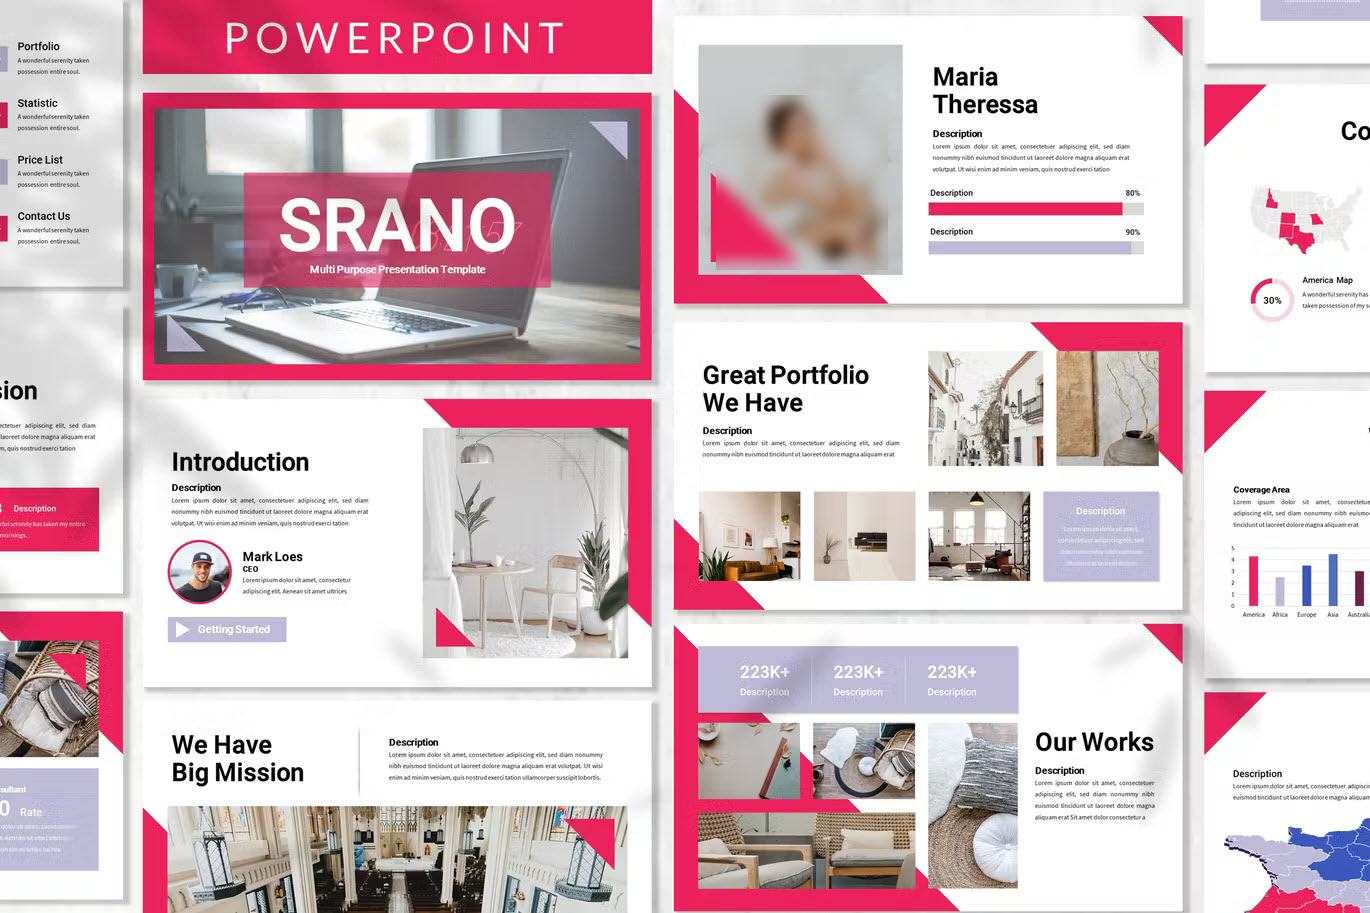 Srano Business Powerpoint Template R8KZWQ5